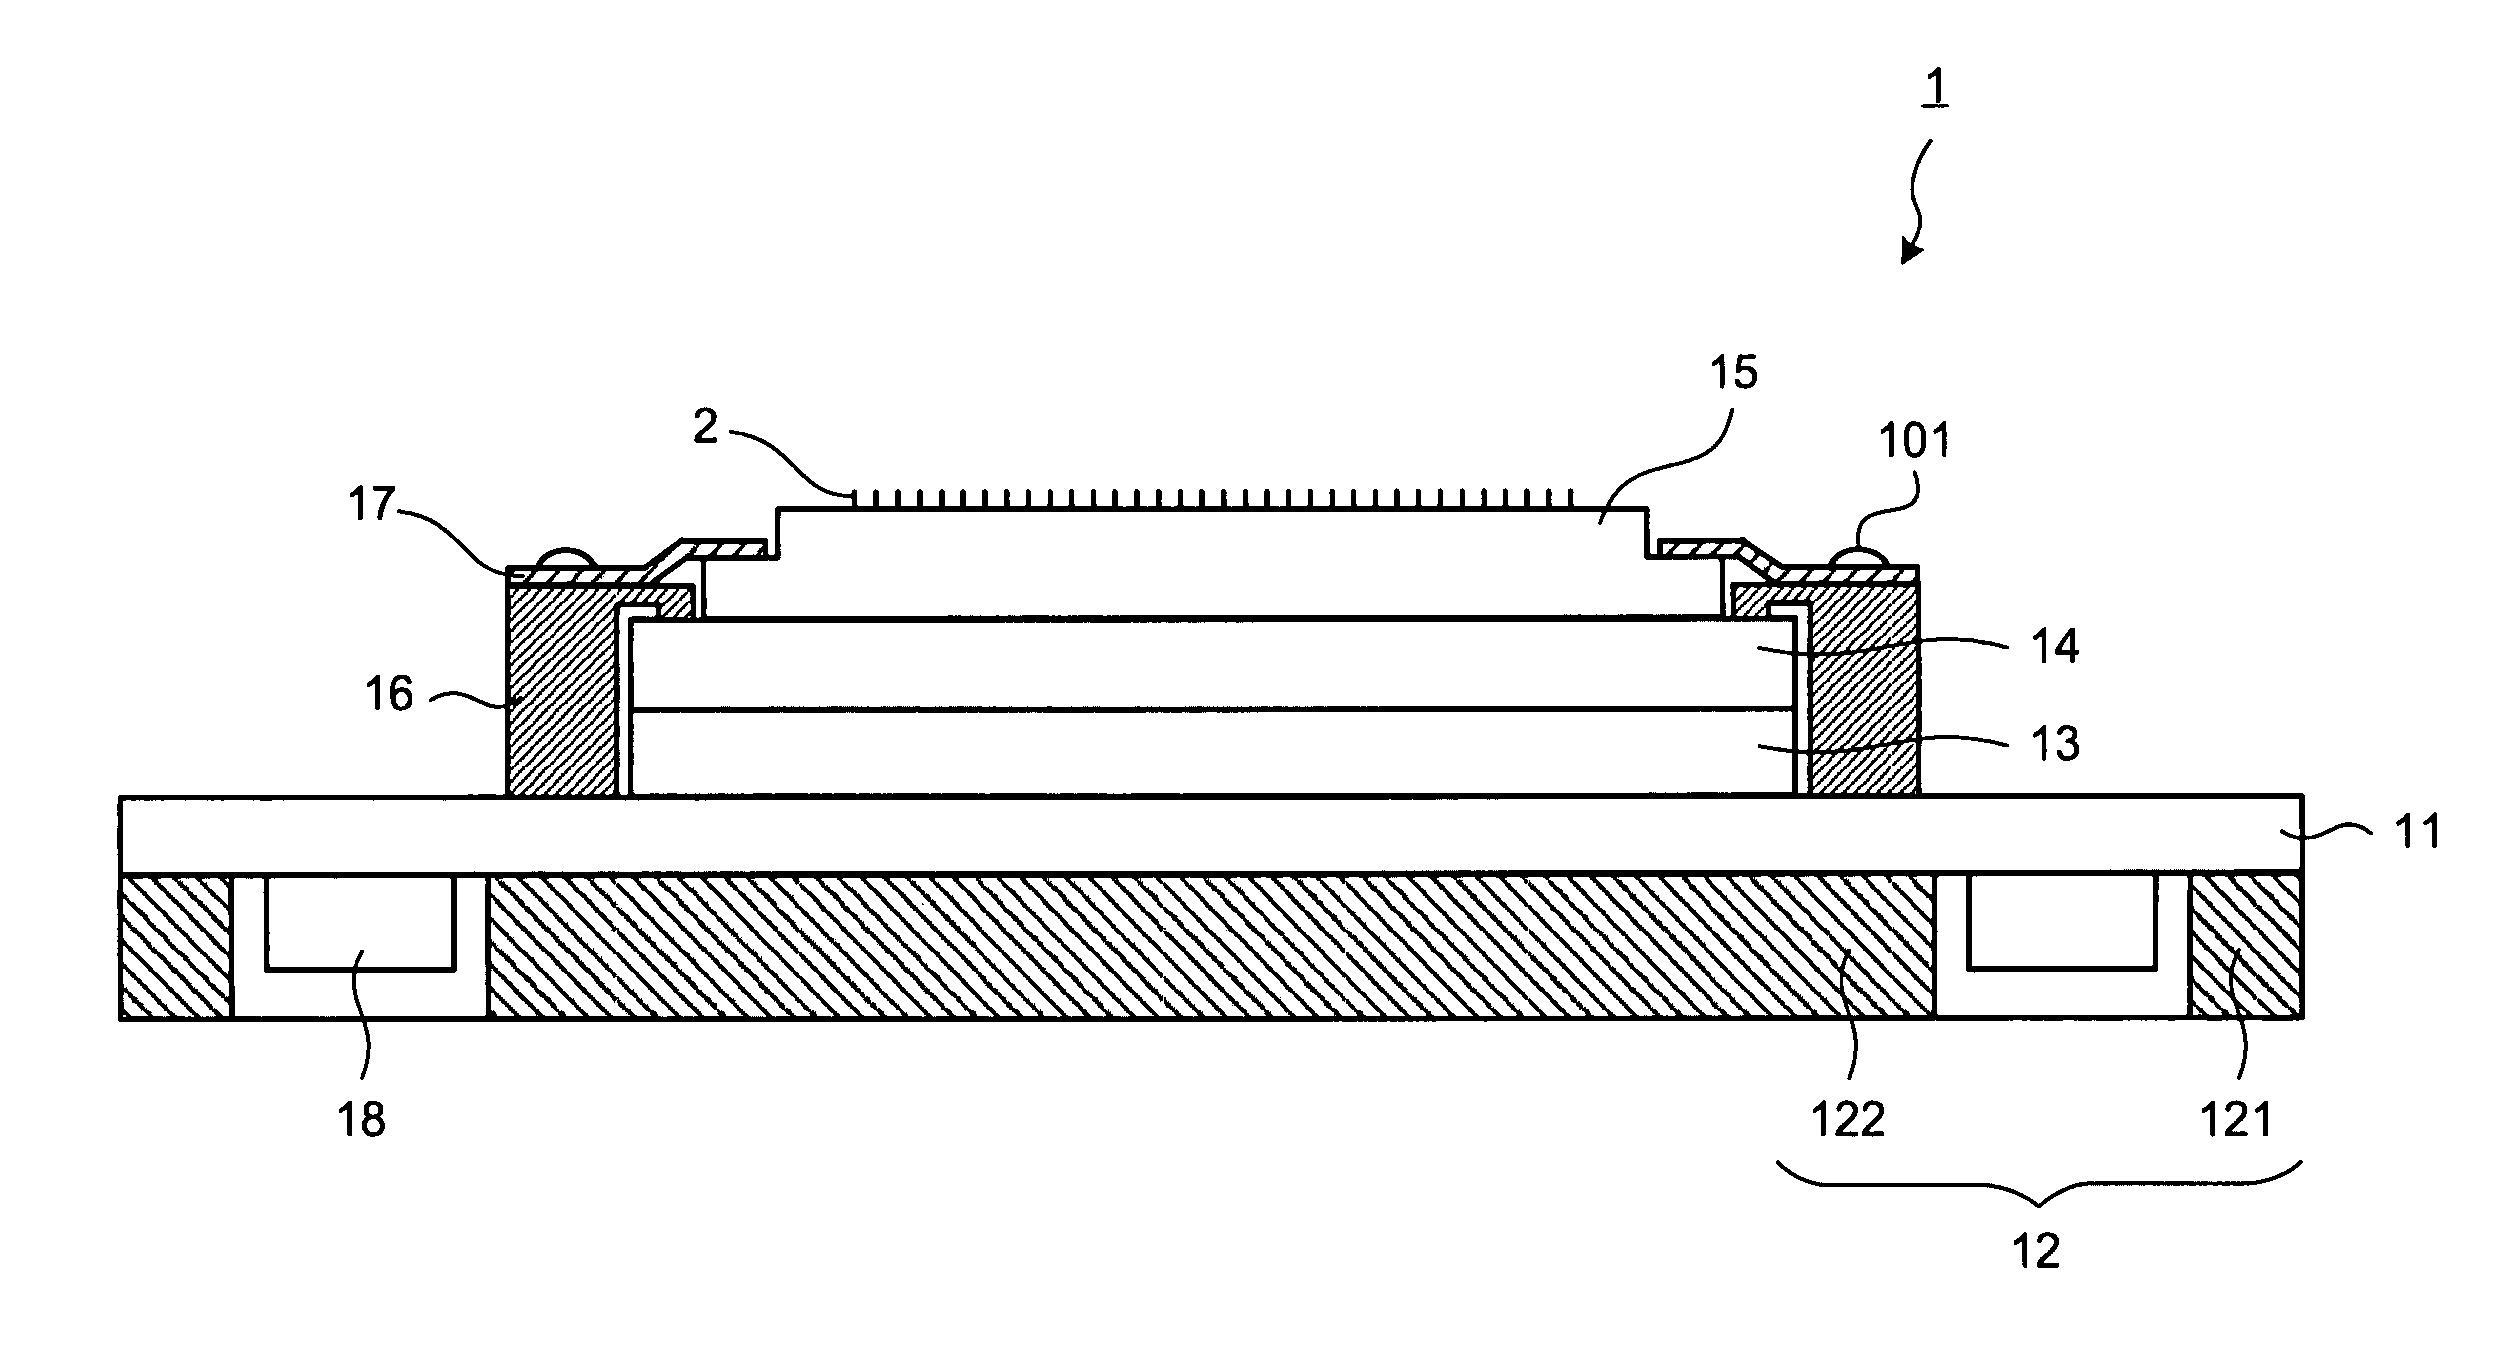 Probe card for a semiconductor wafer